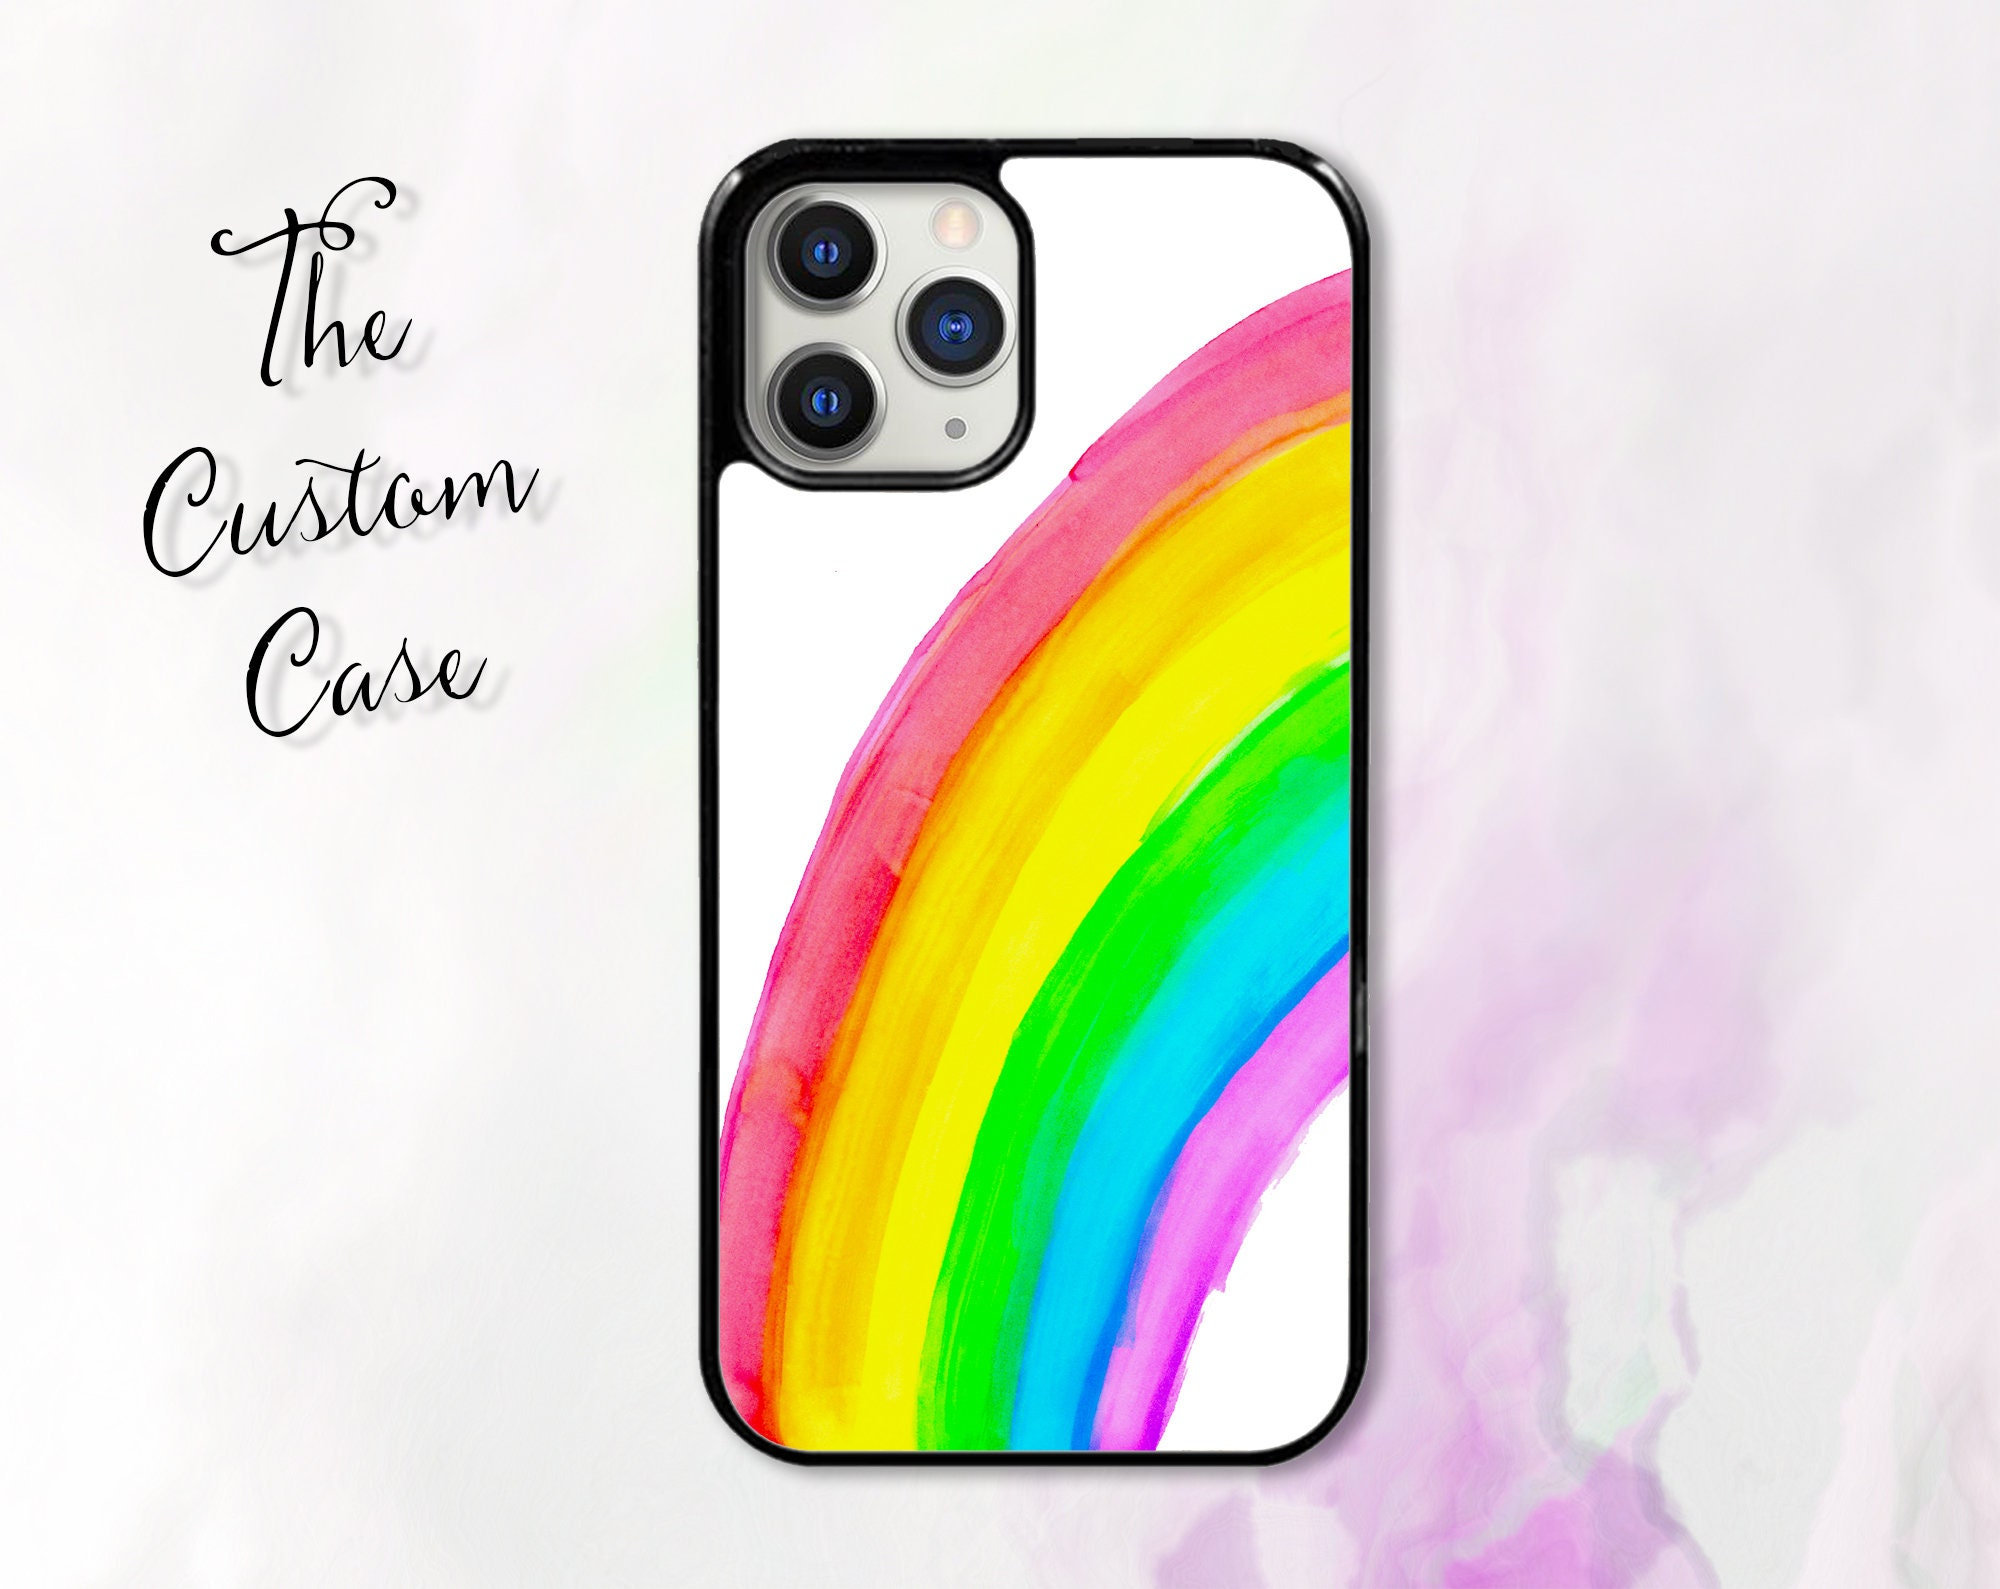 Rainbow Child Art (aged 3) #love iPhone 7 Plus Case by Candy Floss Happy -  Instaprints